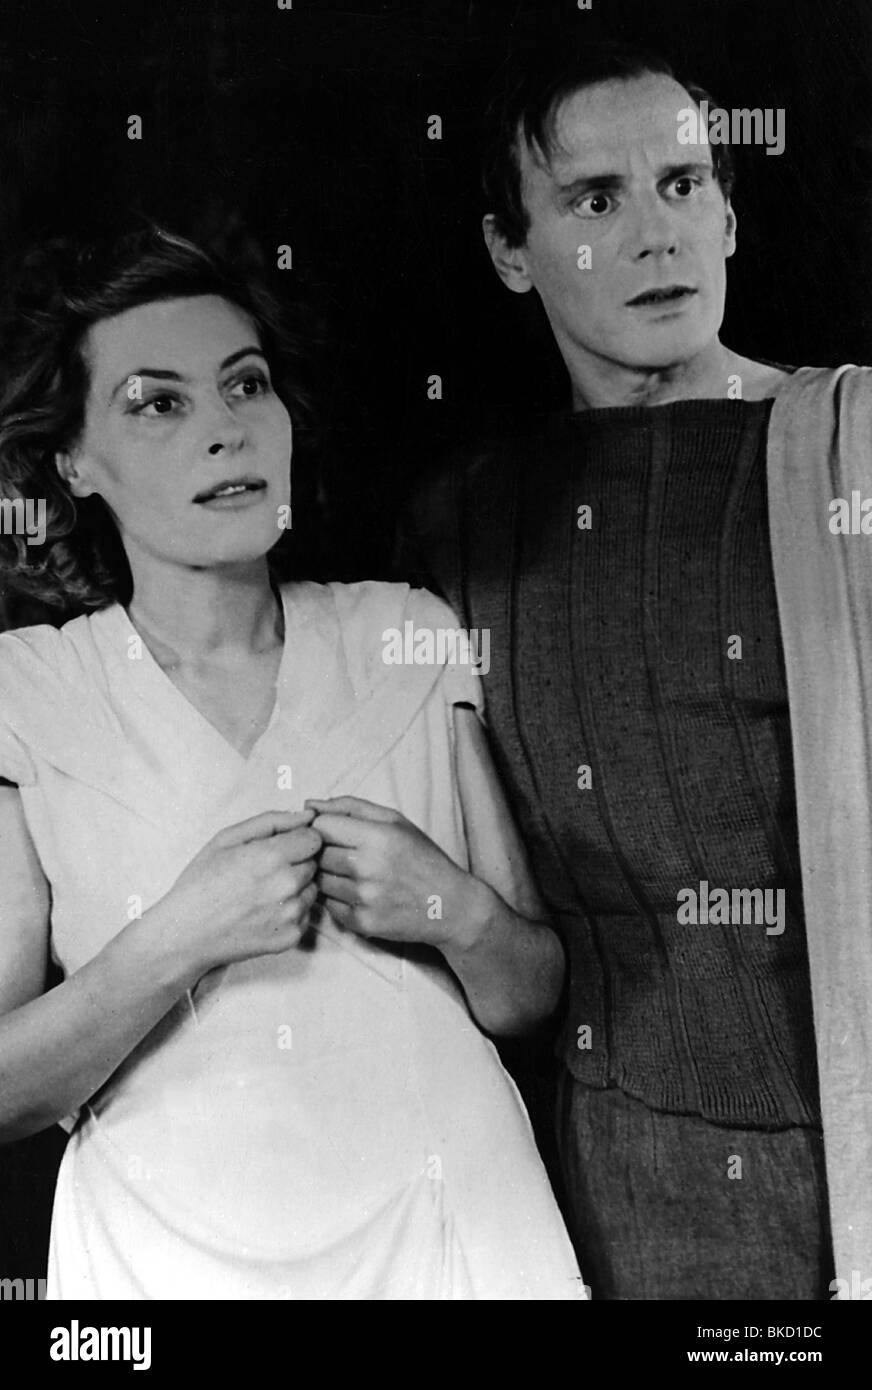 Gruendgens, Gustaf, 22.12.1899 - 7.10.1963, German actor and director, als Orestes in the play 'The Flies' by ean-Paul Sartre, with Marianne Hoppe as Electra, 1947, , Stock Photo